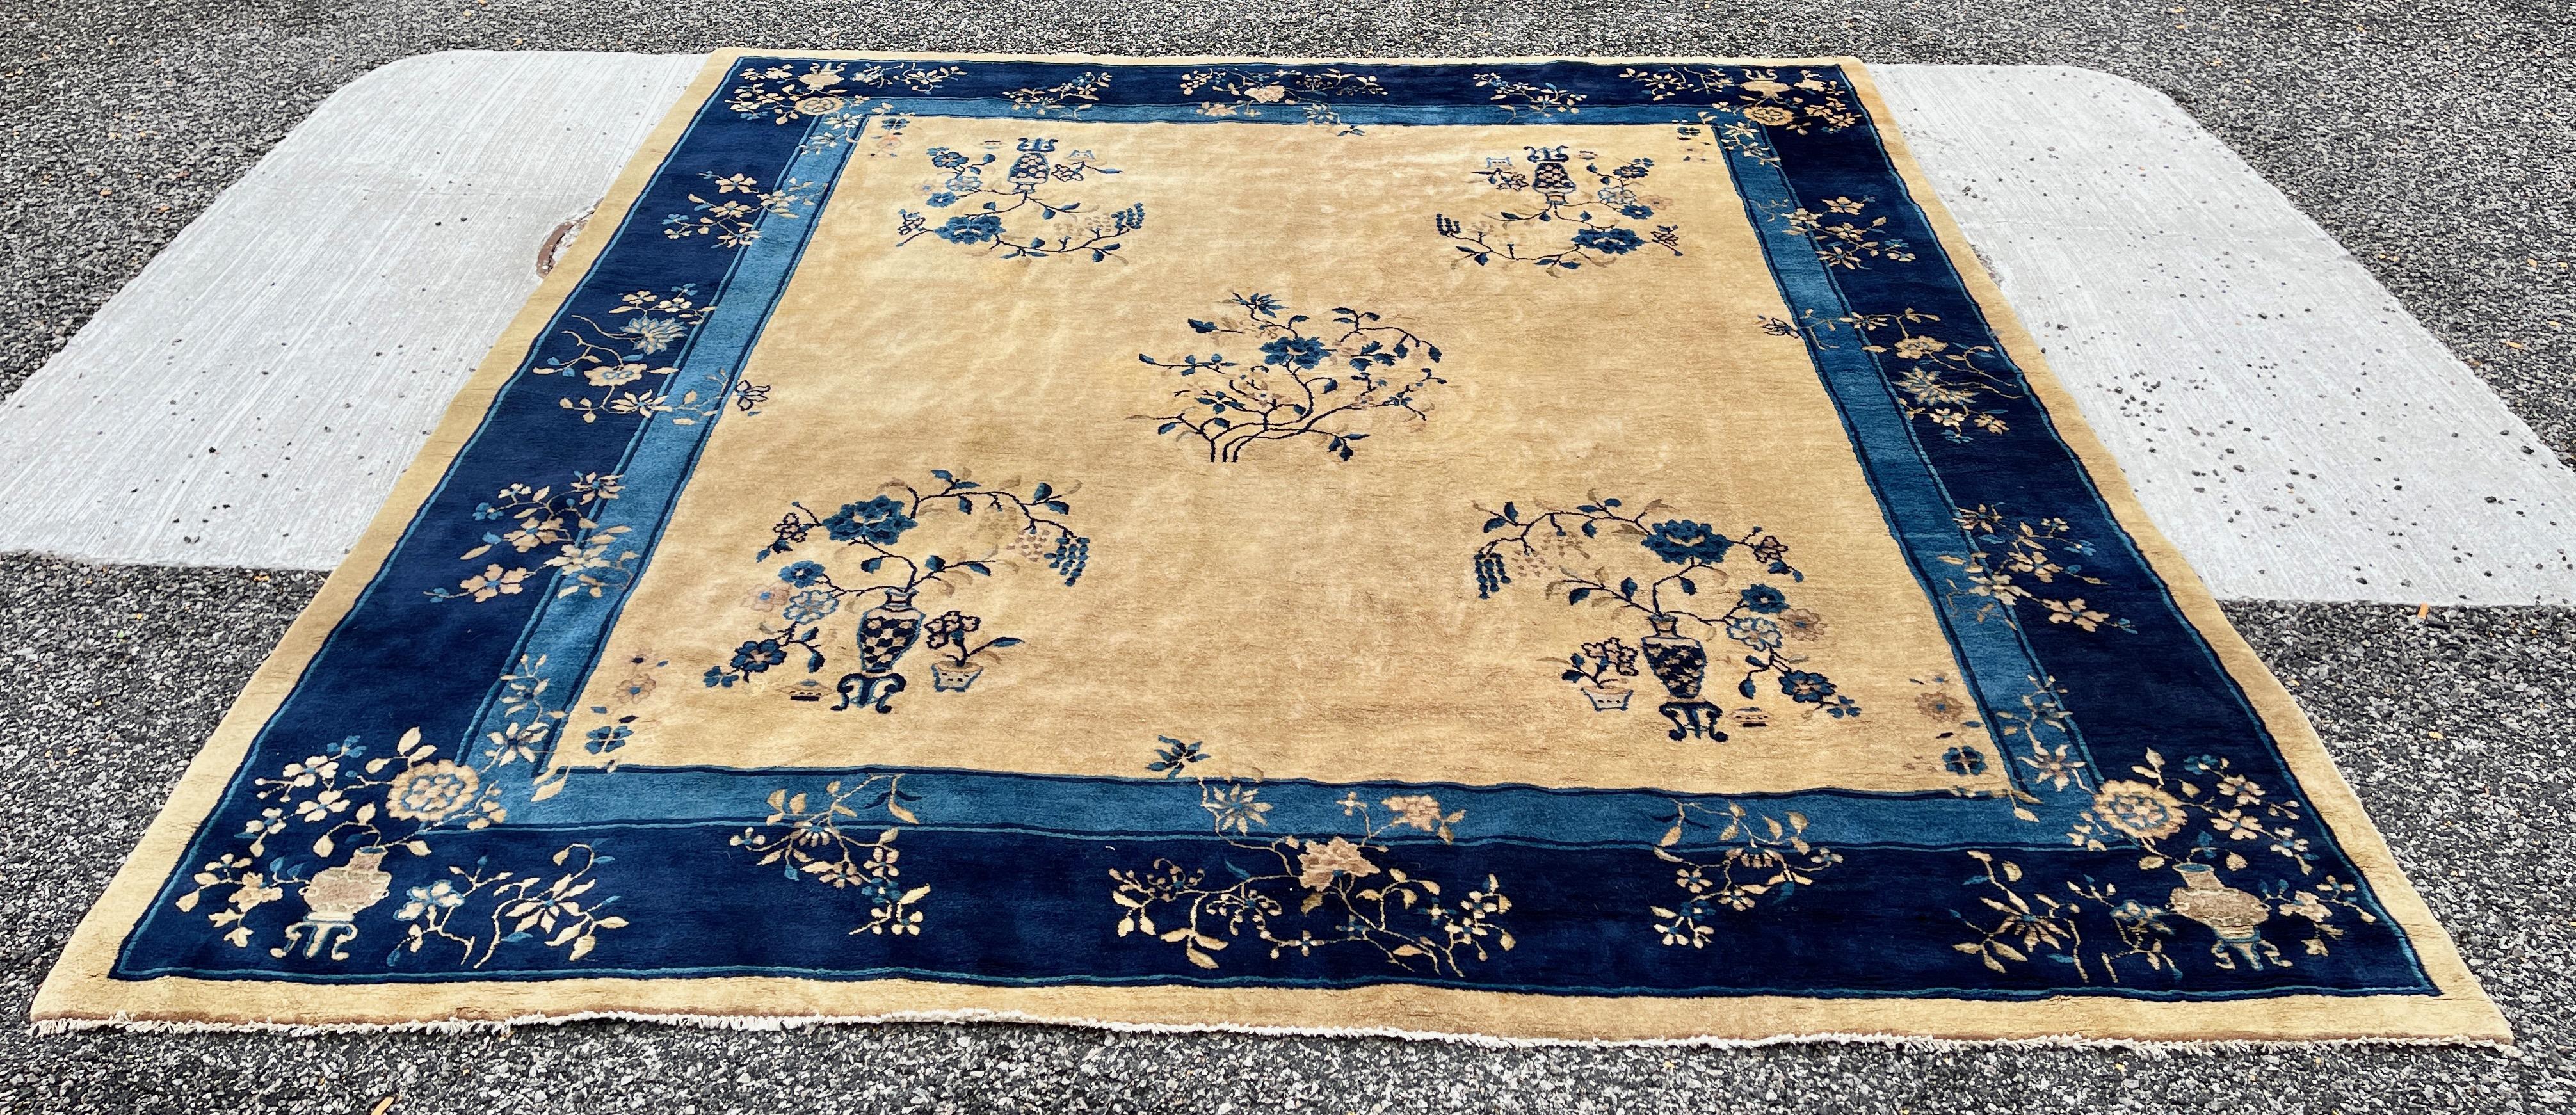 Hand-Knotted 1920's Peking Chinese Art Deco Rug 9' x 10' For Sale